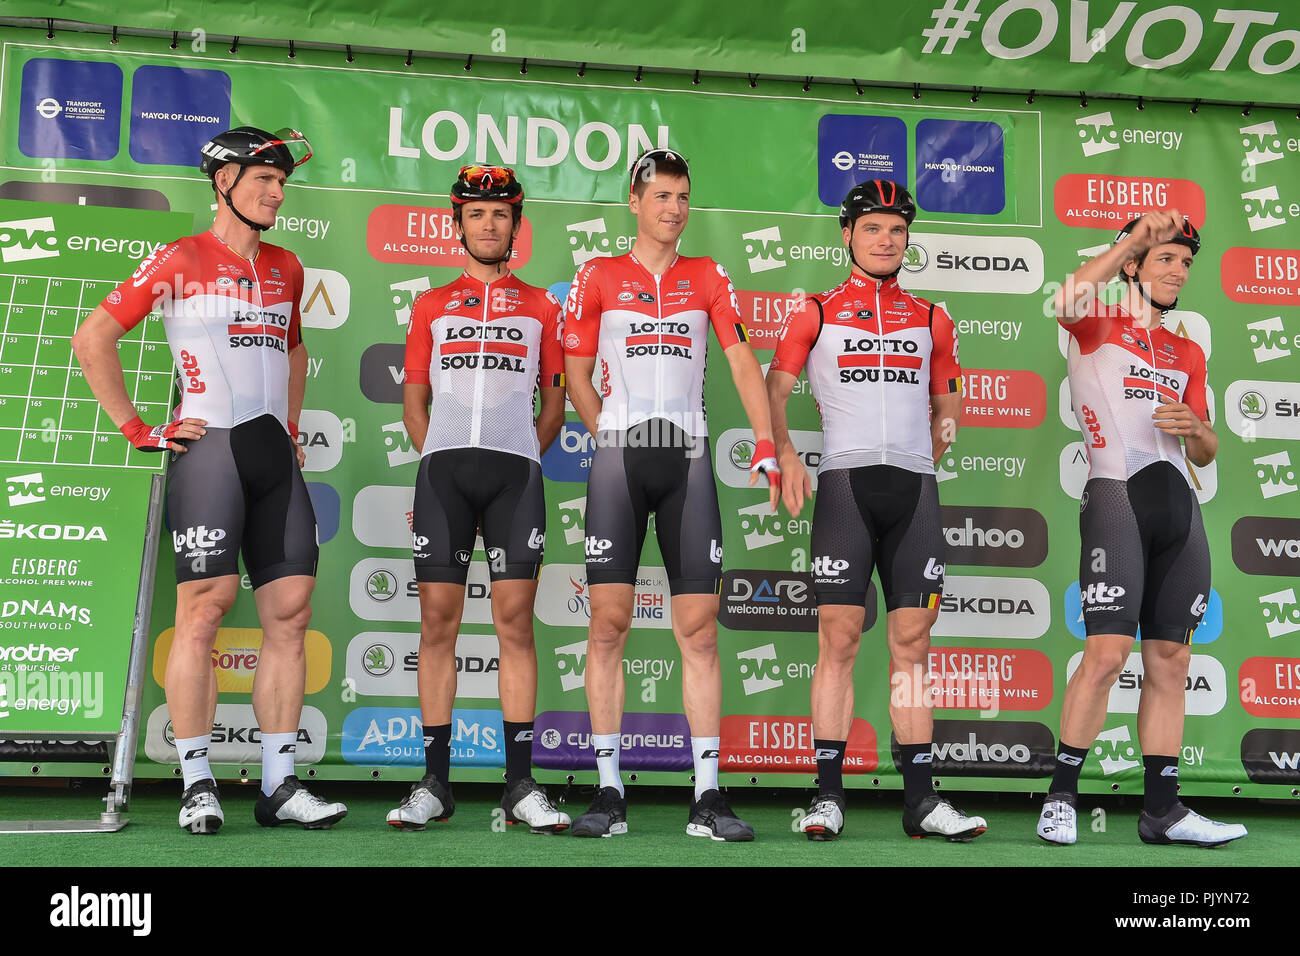 London, UK. 9th Sept 2018. Tea Lotto - Soudal - Jasper De Buyst, André Greipel, Moreno Hofland, James Shaw, Jens Keukeleire and Jelle Vanendert at team presentation during 2018 OVO Energy Tour of Britain - Stage Eight: The London Stage on Sunday, September 09, 2018, LONDON ENGLAND: Credit: Taka Wu/Alamy Live News Stock Photo